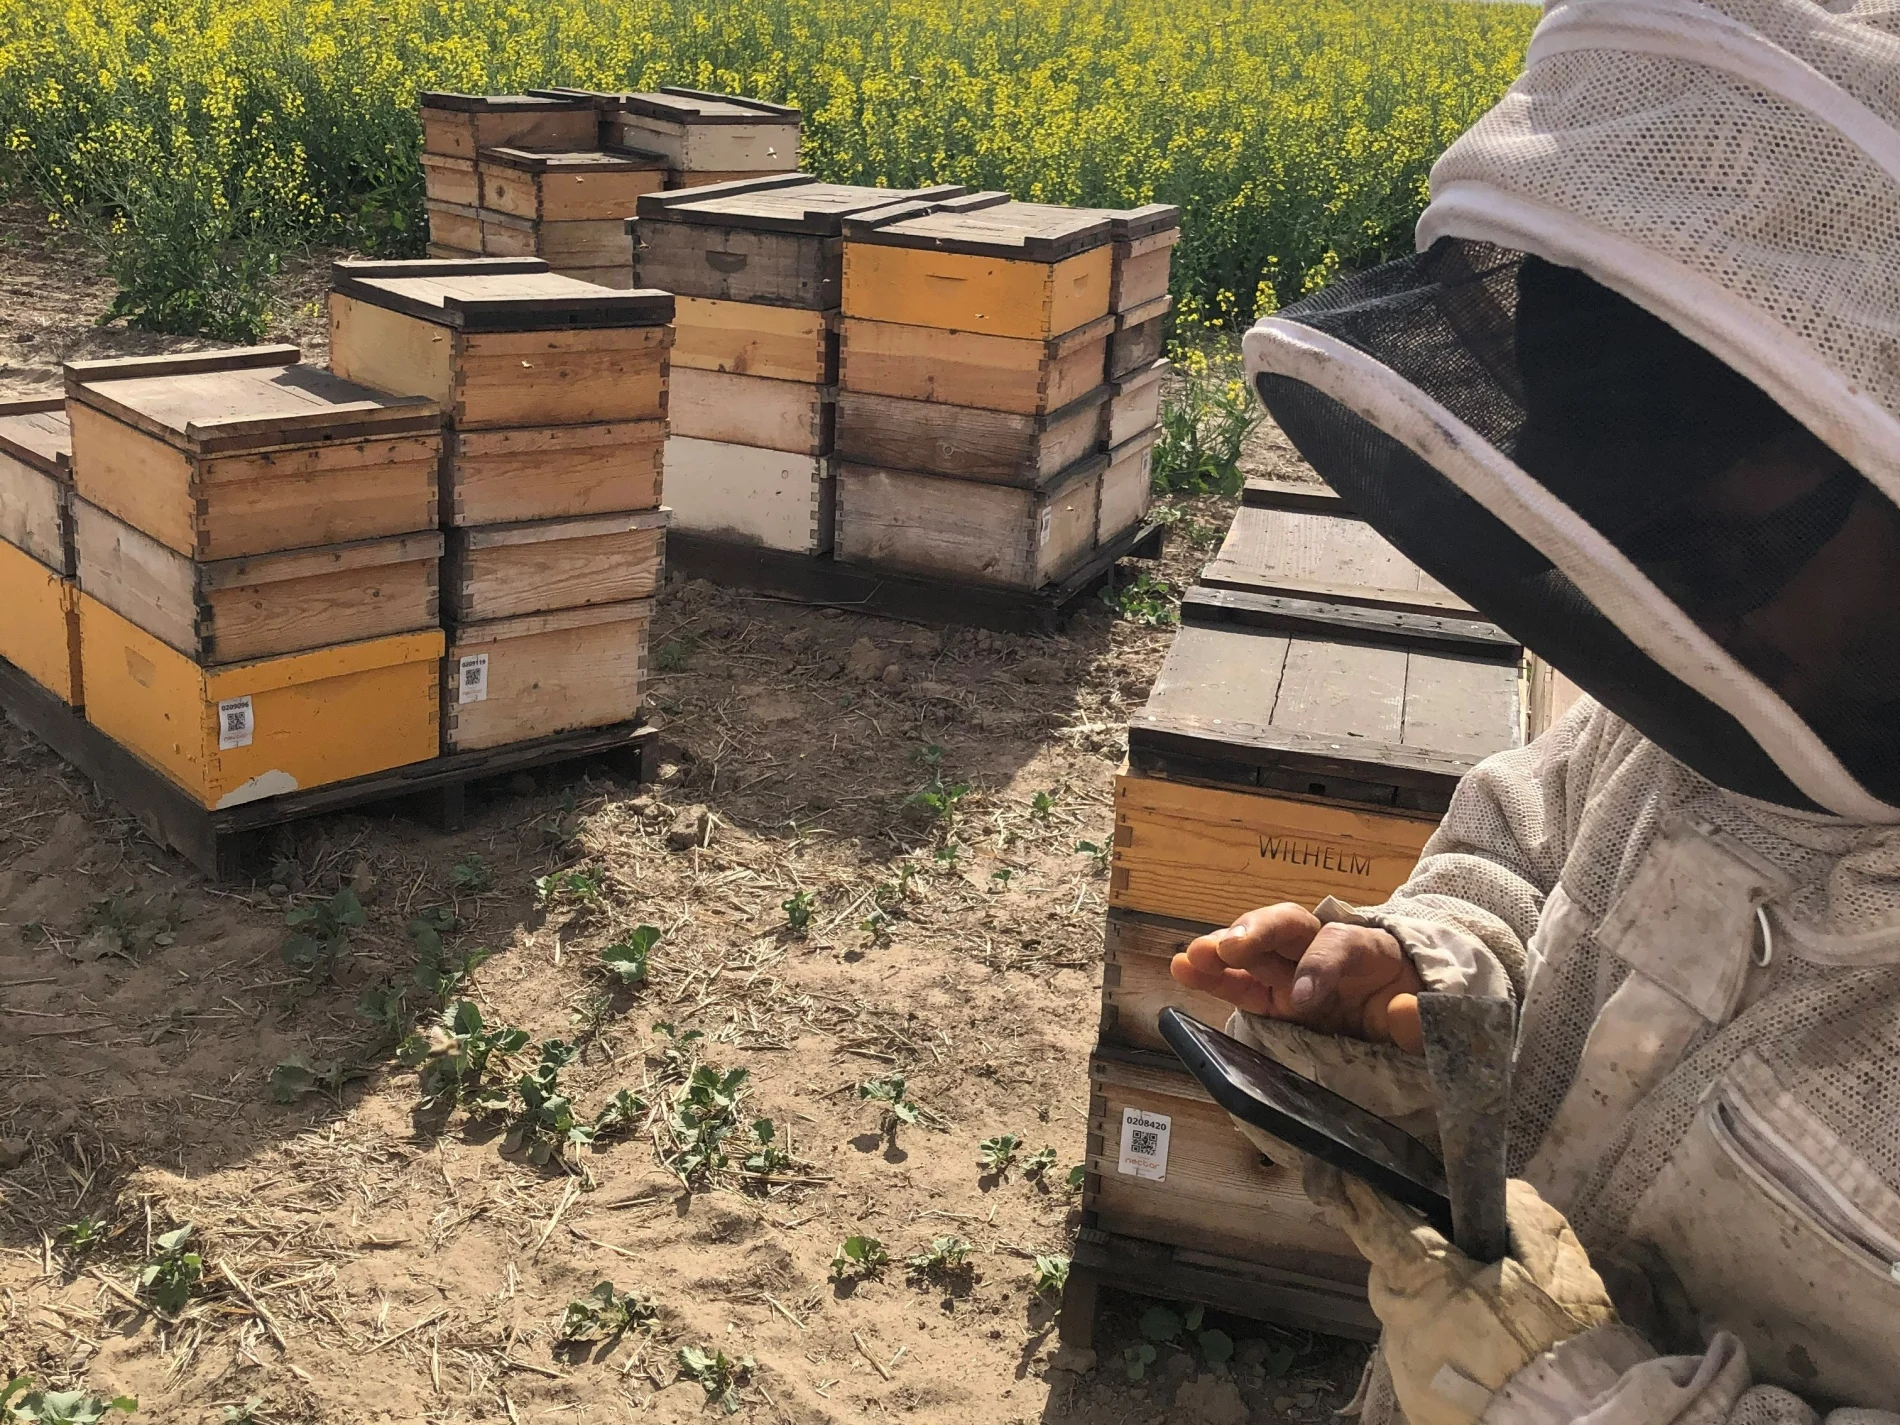 The Pollinator Fund also invested in Nectar, a Montreal-based maker of a smartphone tracking tool called BeeTrack that helps beekeepers track hives throughout the growing season.